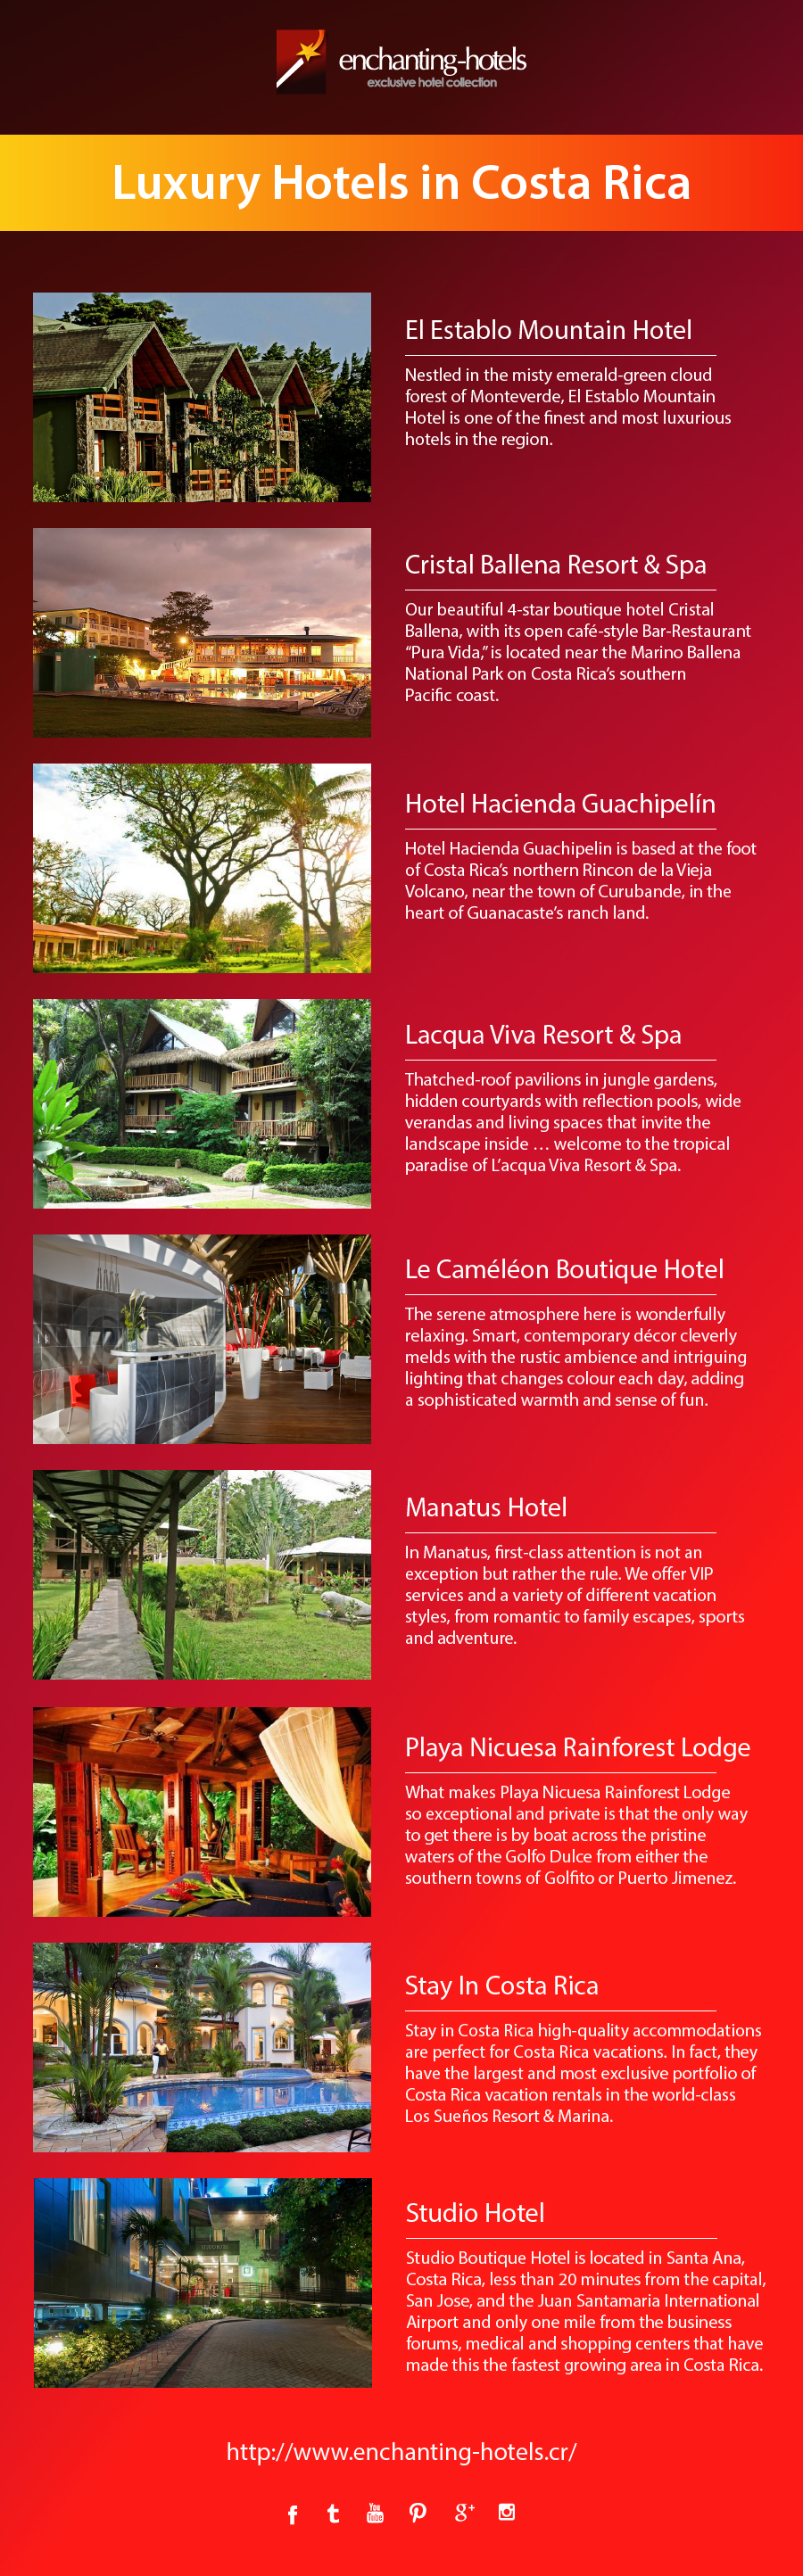 Meet our Luxury Enchanting Hotels in Costa Rica